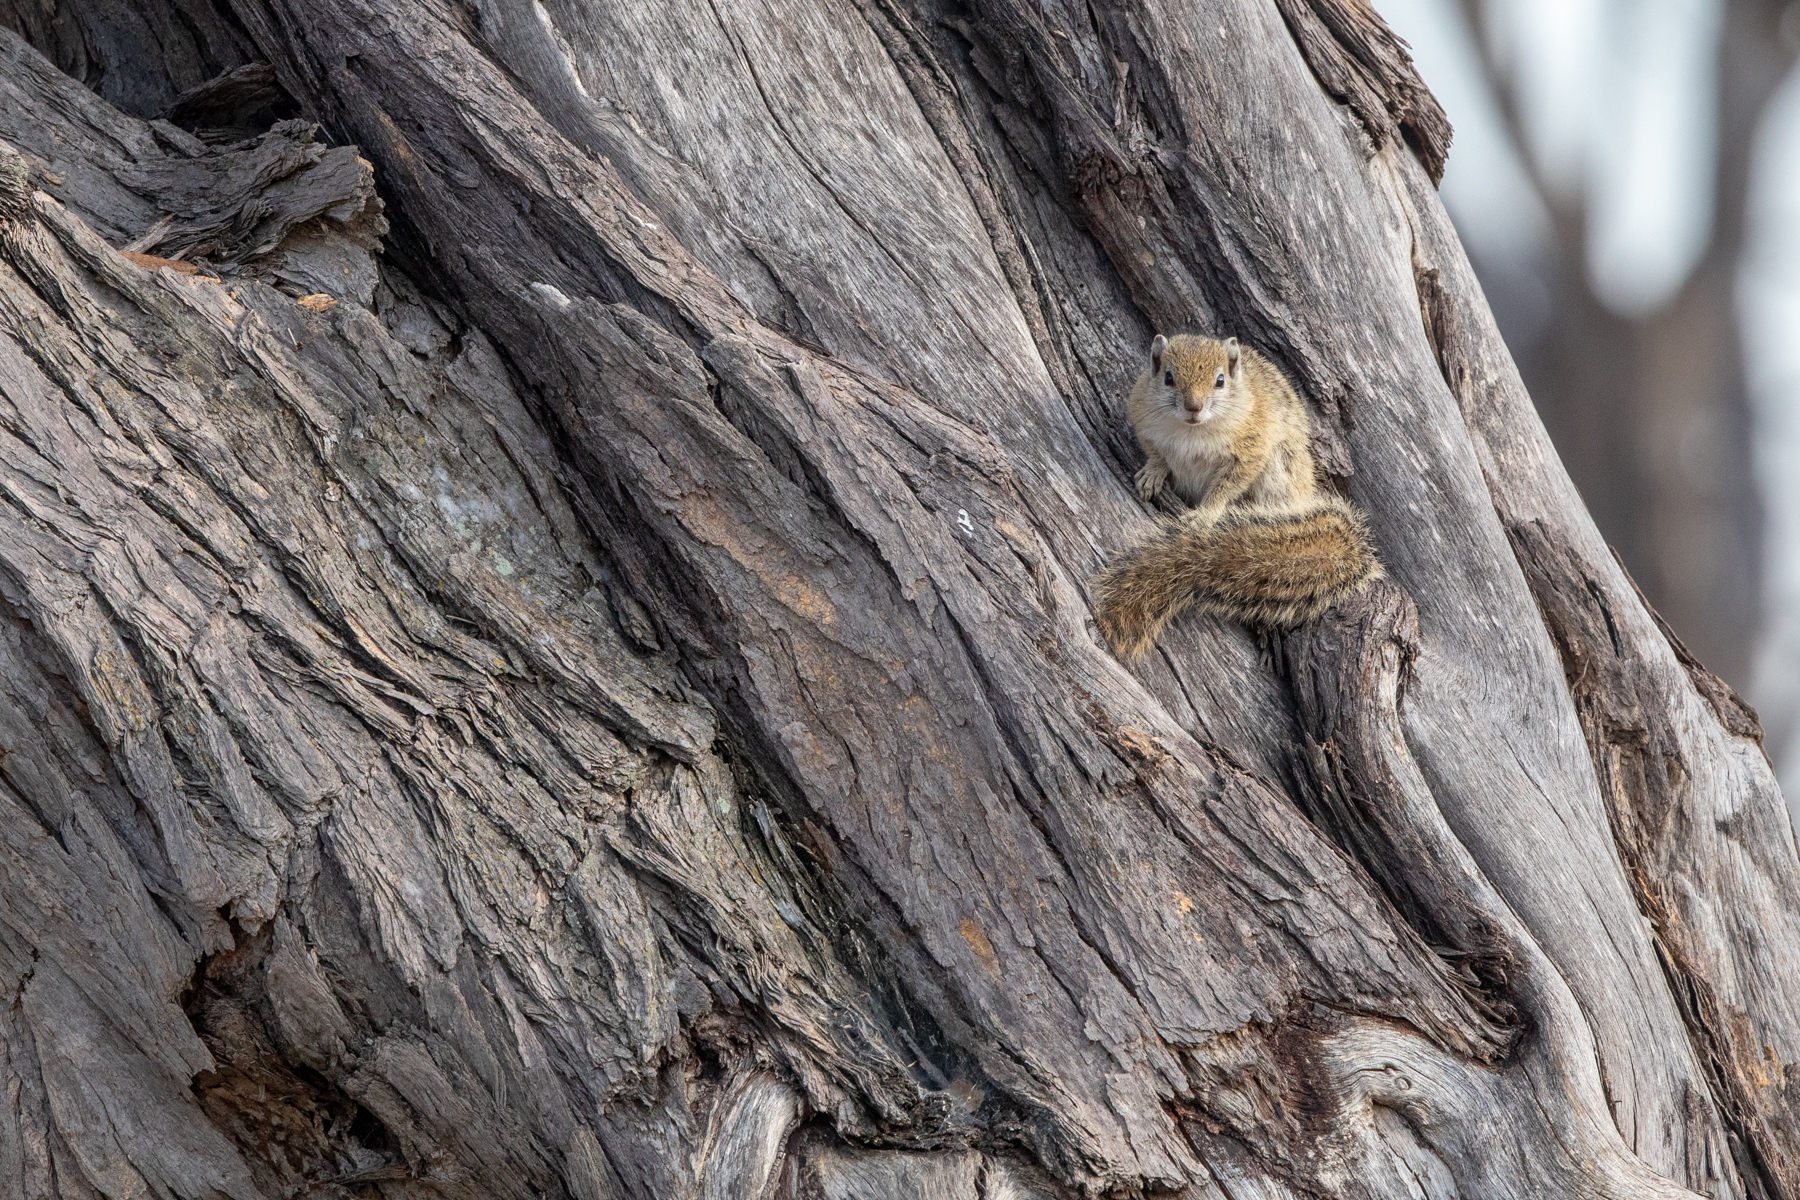 A Tree Squirrel in its world of bark